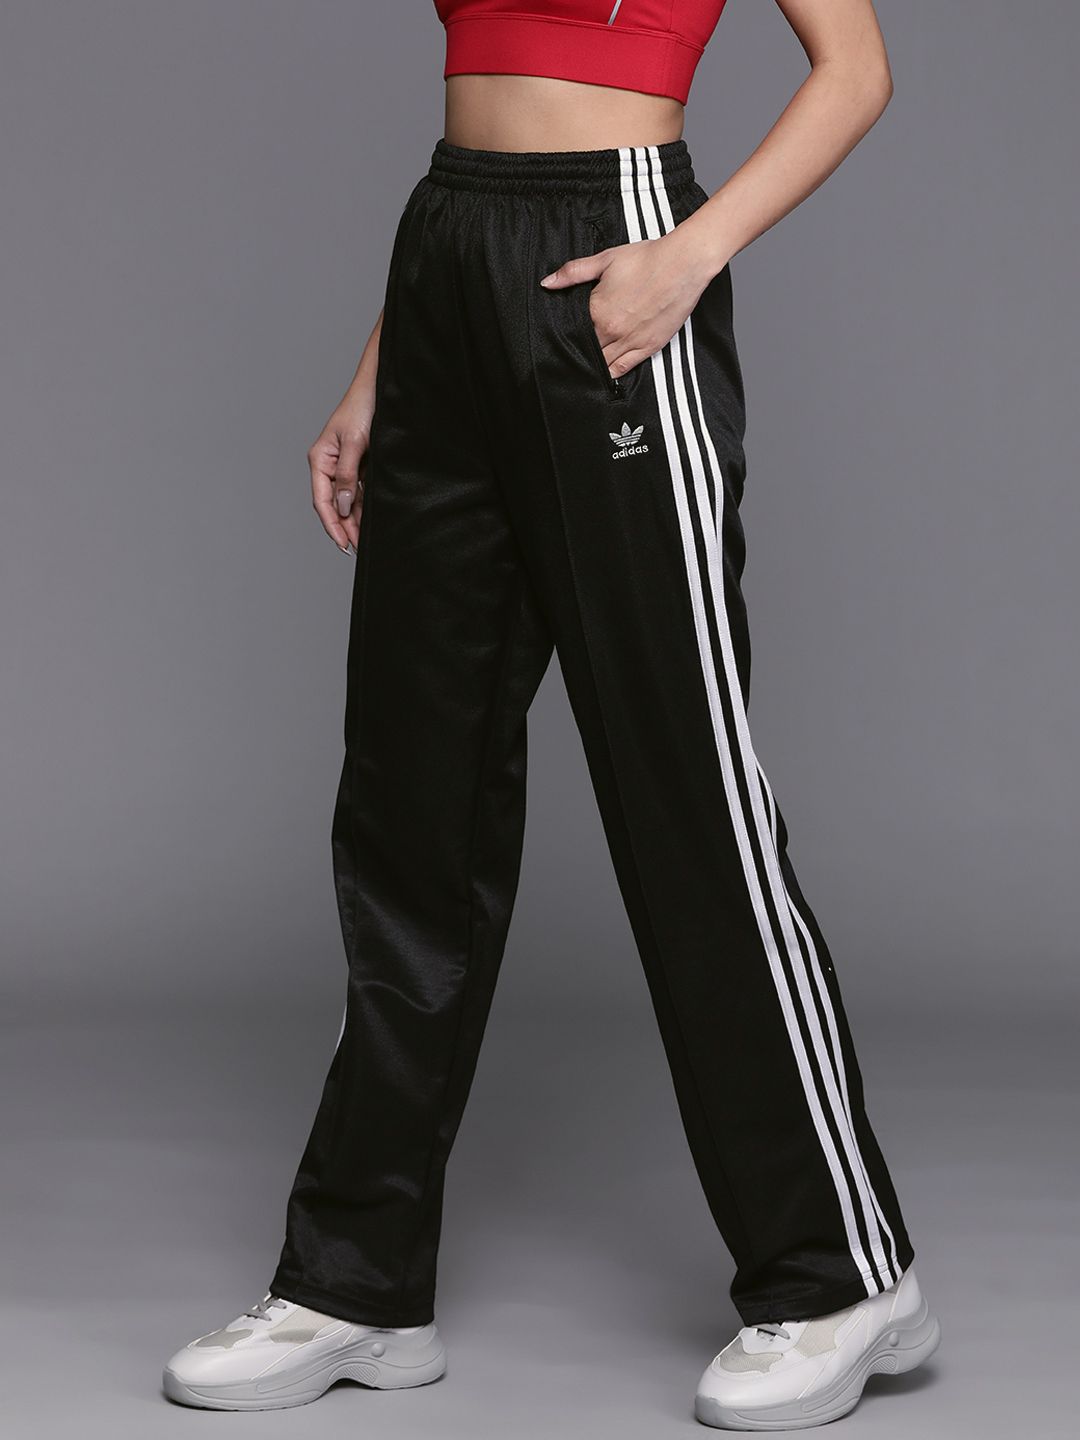 ADIDAS Originals Women Black Solid Flared Sustainable Track Pants Price in India